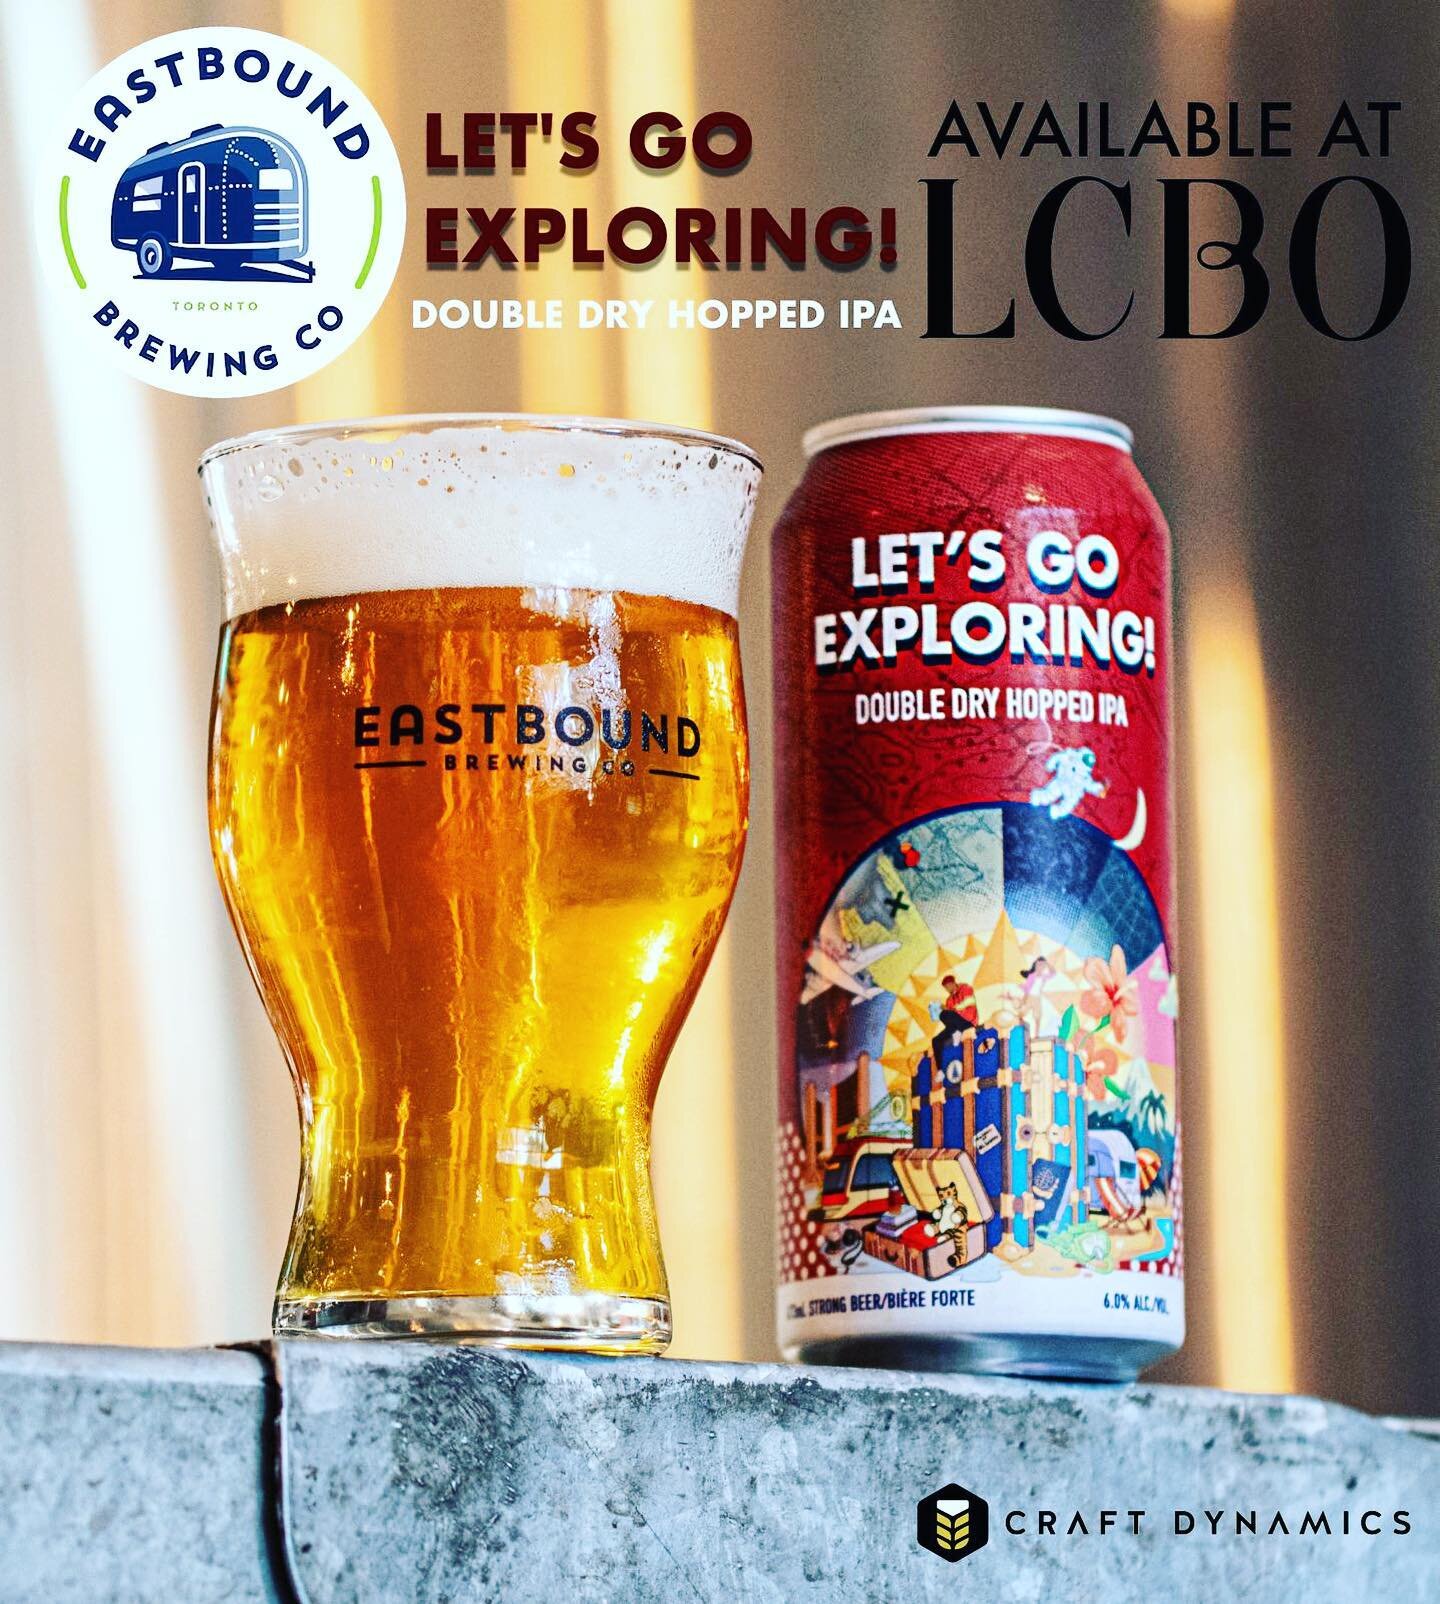 LET'S GO EXPLORING DOUBLE DRY HOPPED IPA - 473 ML by @eastboundbeer now at LCBO.  Bold, juicy melon and crisp citrus is backed up with just enough pine to be reminiscent of the West Coast. This IPA is something you need in your life. Plain and simple